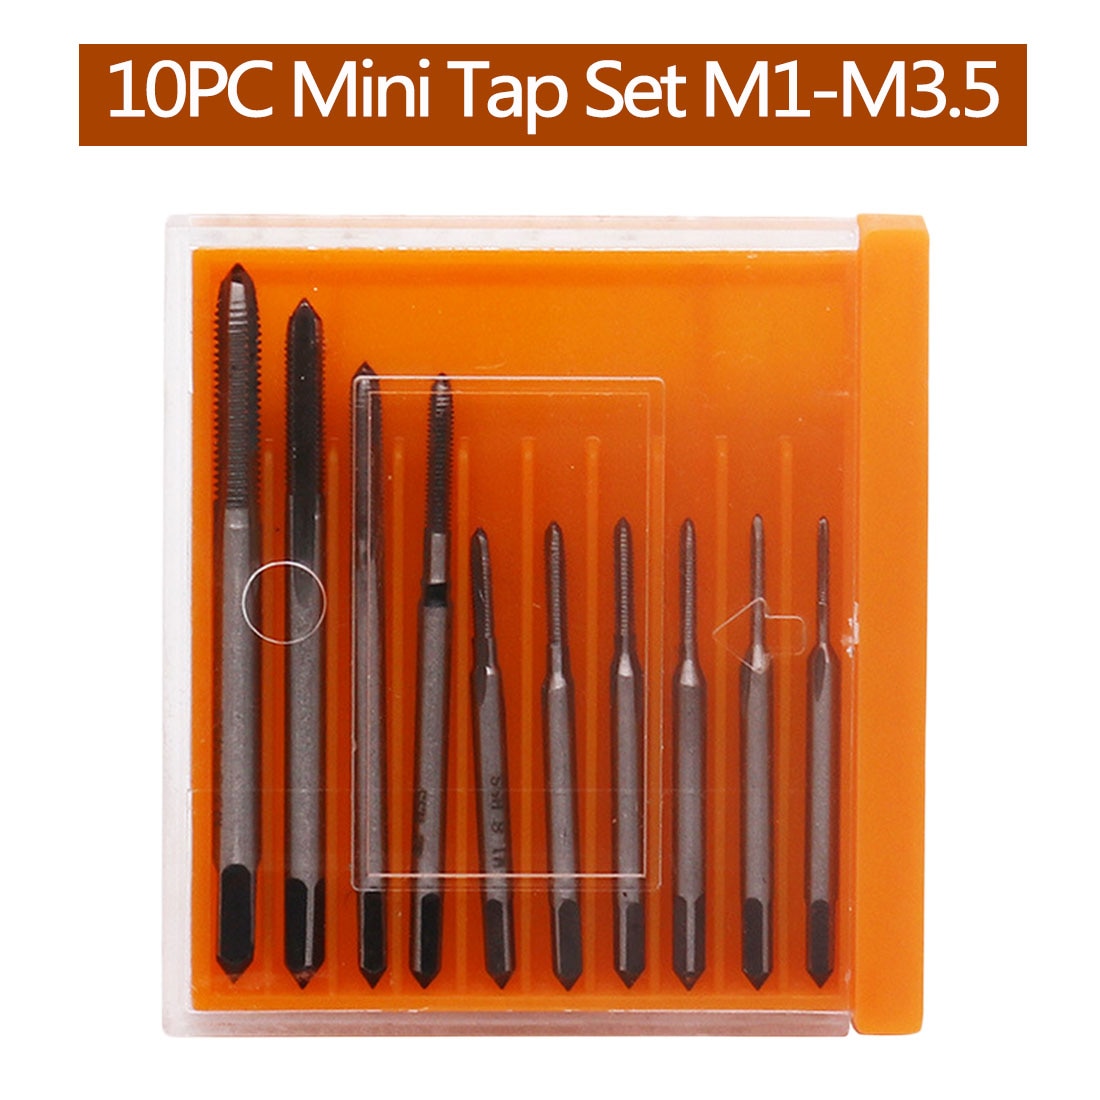 10pcs / set ڵ   ̾  /  /  /  M1 M1.4 M1.6 M1.7 M1.8 M2 M 2.5 M3 M3.5 ڵ /10pcs/set Hand Tap Thread Wire Tapping/Threading/Taps/Attac